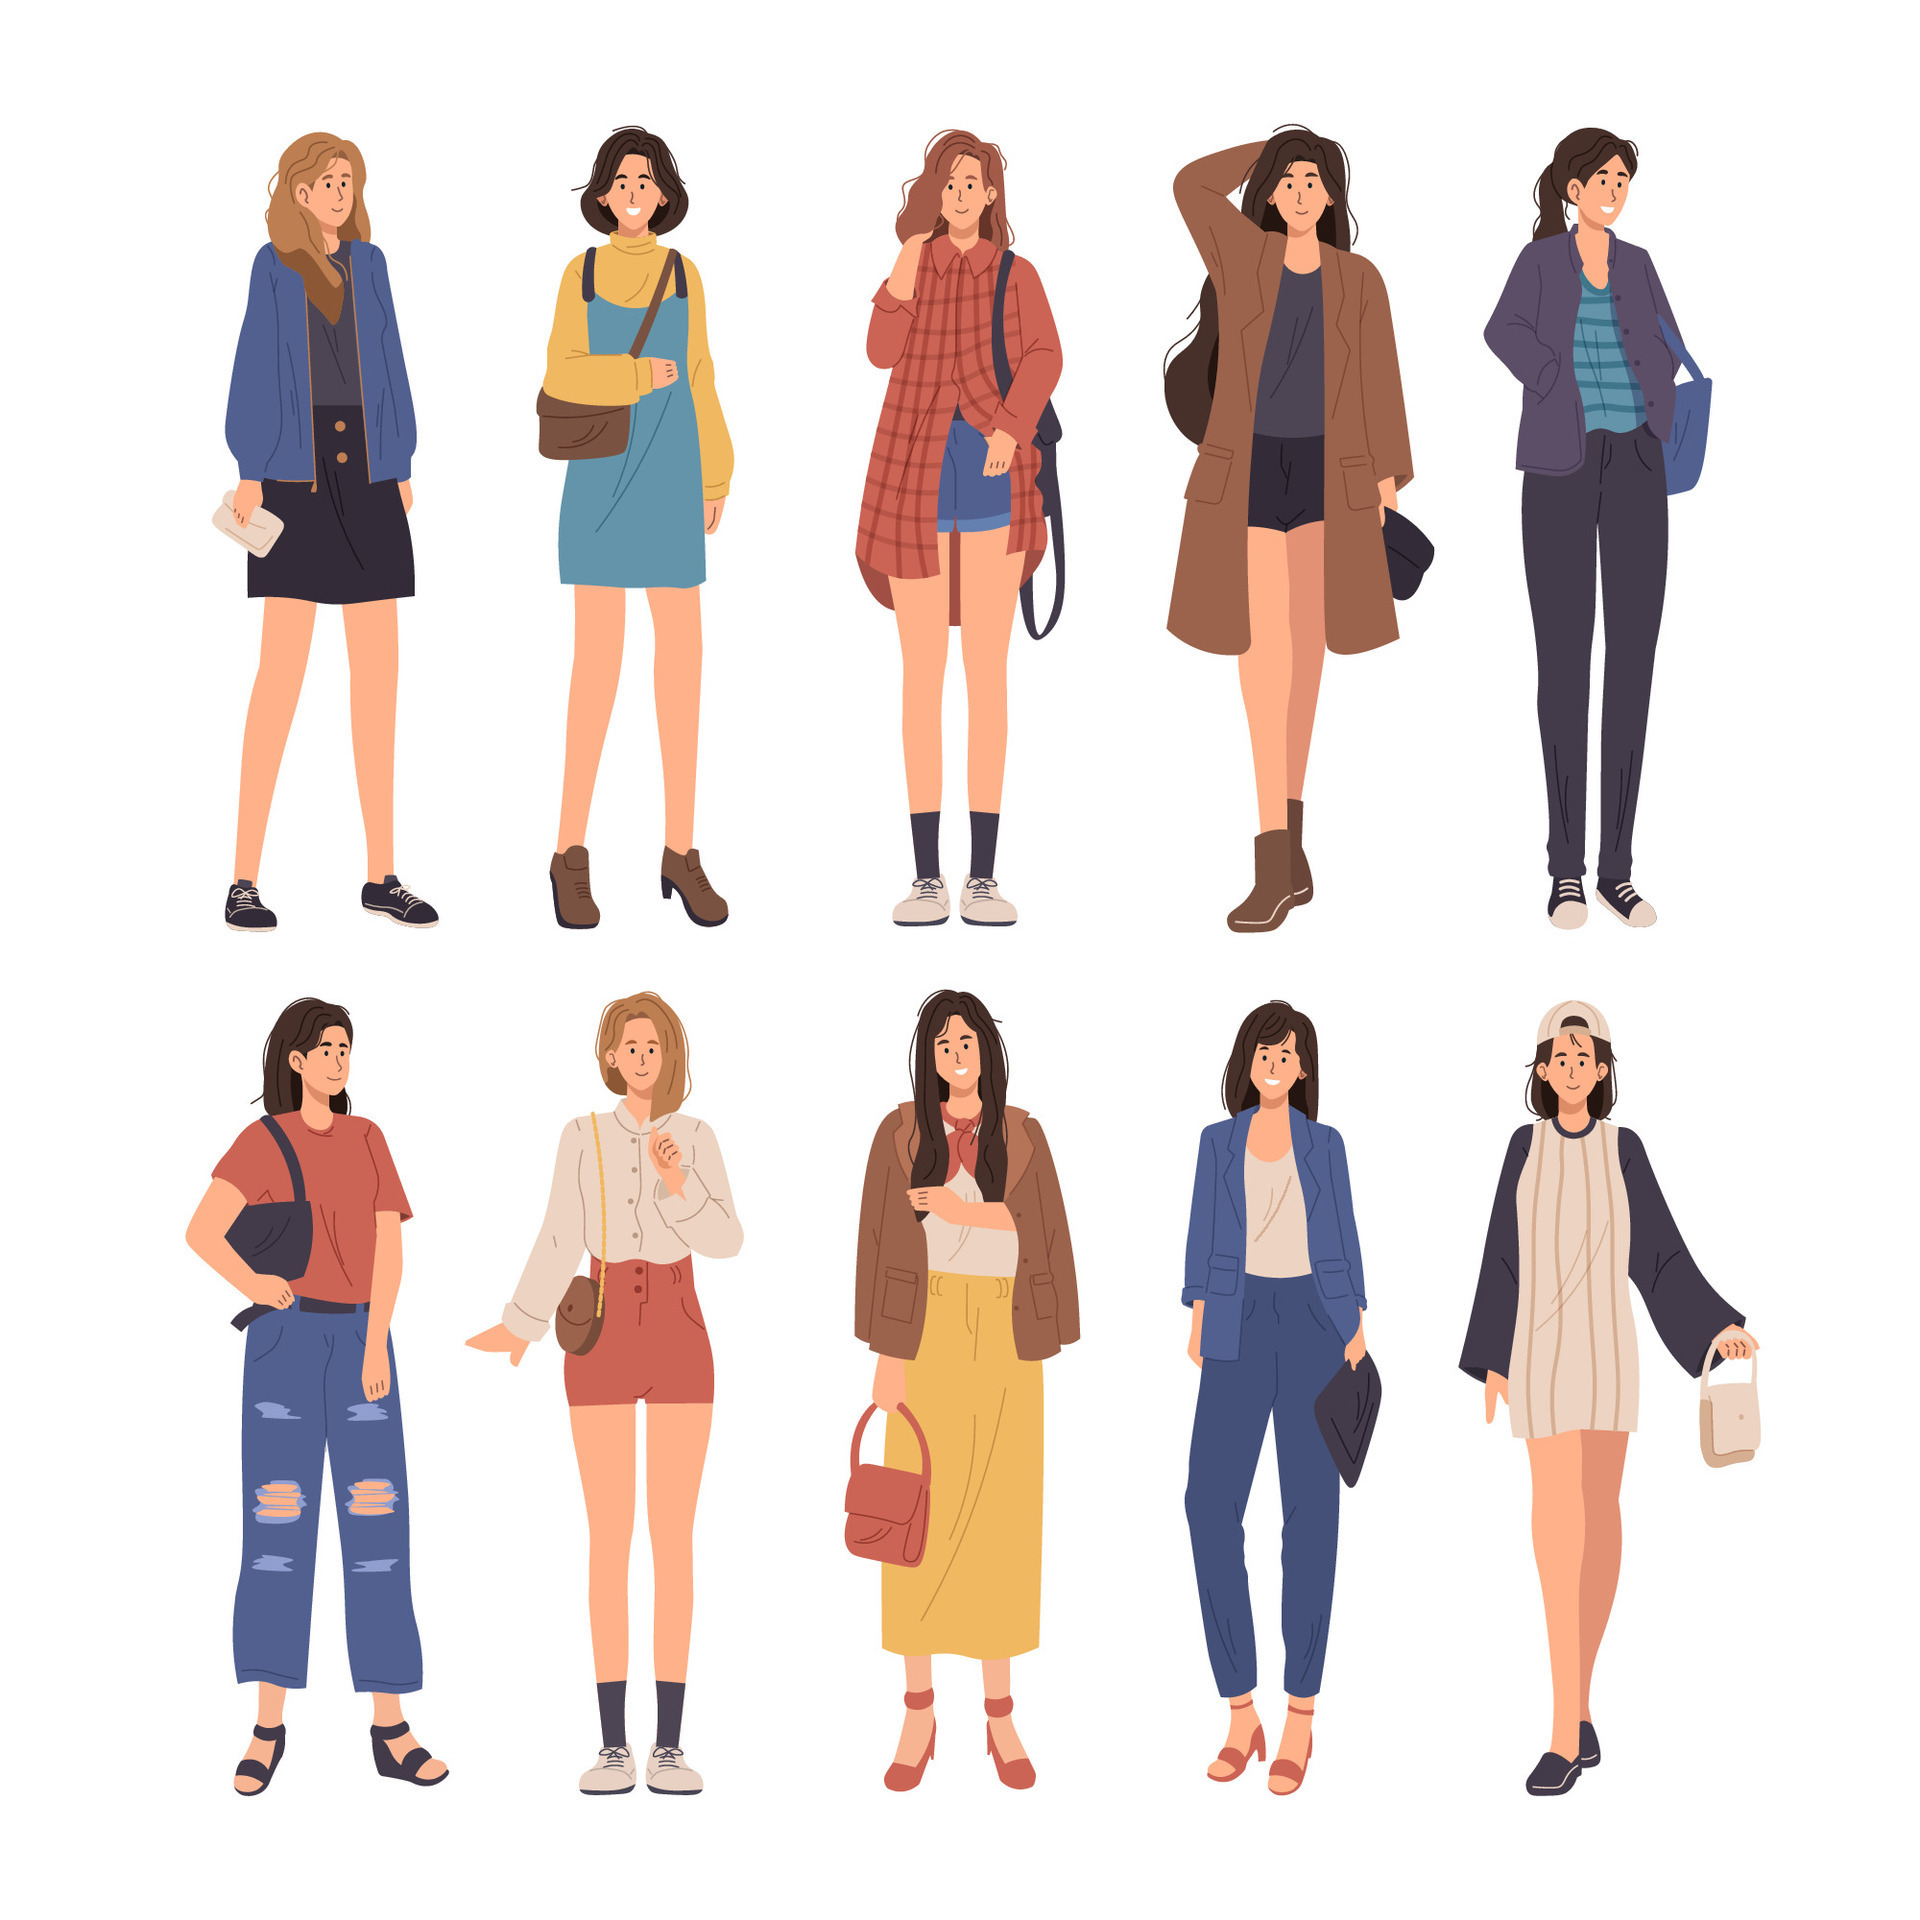 https://static.vecteezy.com/system/resources/previews/028/546/320/original/collection-of-young-women-dressed-in-trendy-clothes-set-of-fashionable-casual-outfit-korean-fashion-style-vector.jpg